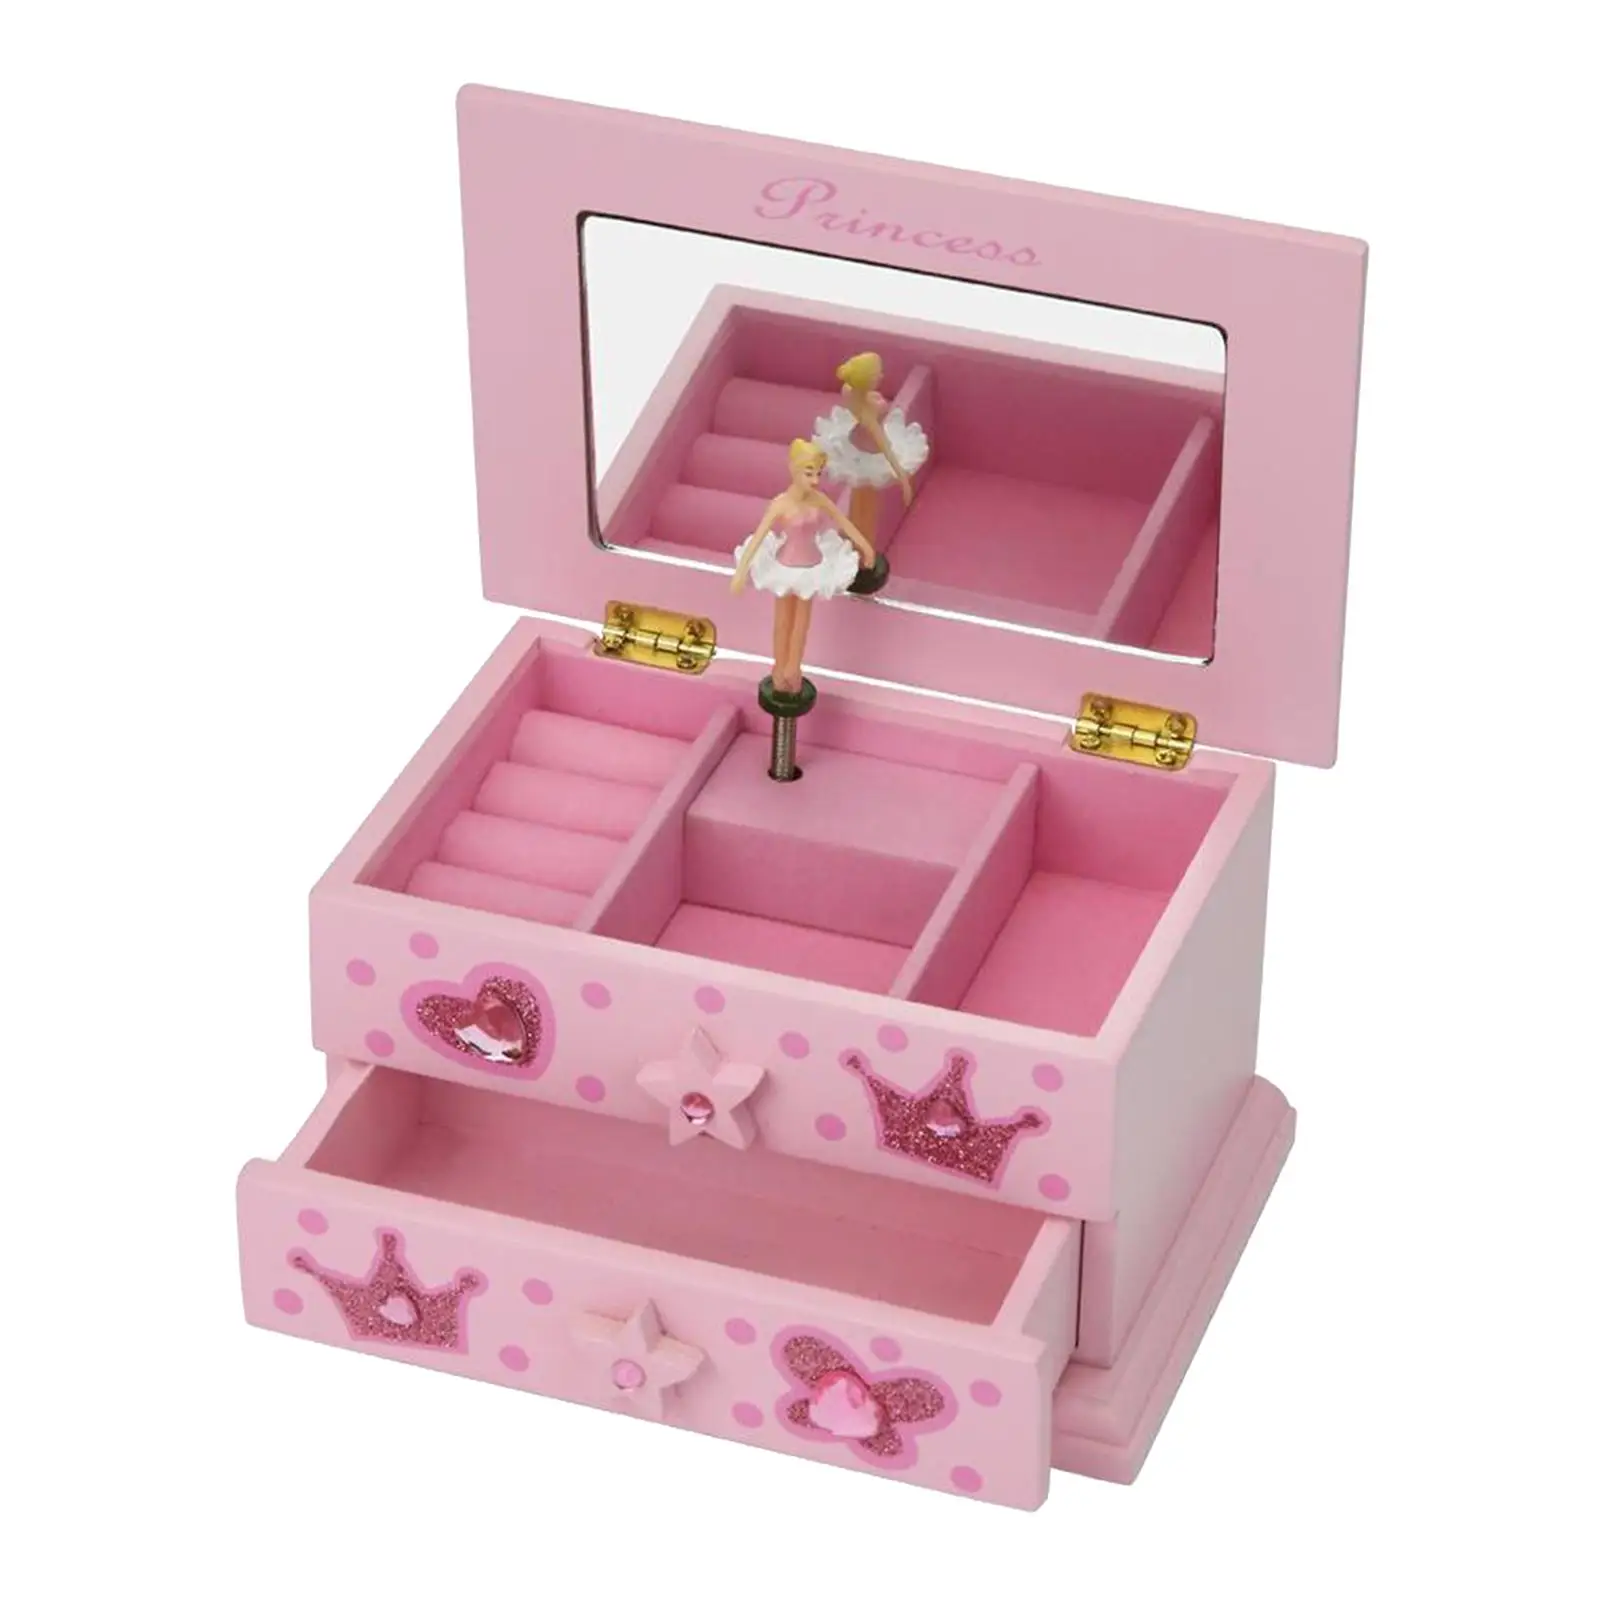 Jewelry Box for Women Girls Jewelry Organizer Storage Case with Two Layers Display for Earrings Bracelets Rings Musical Box